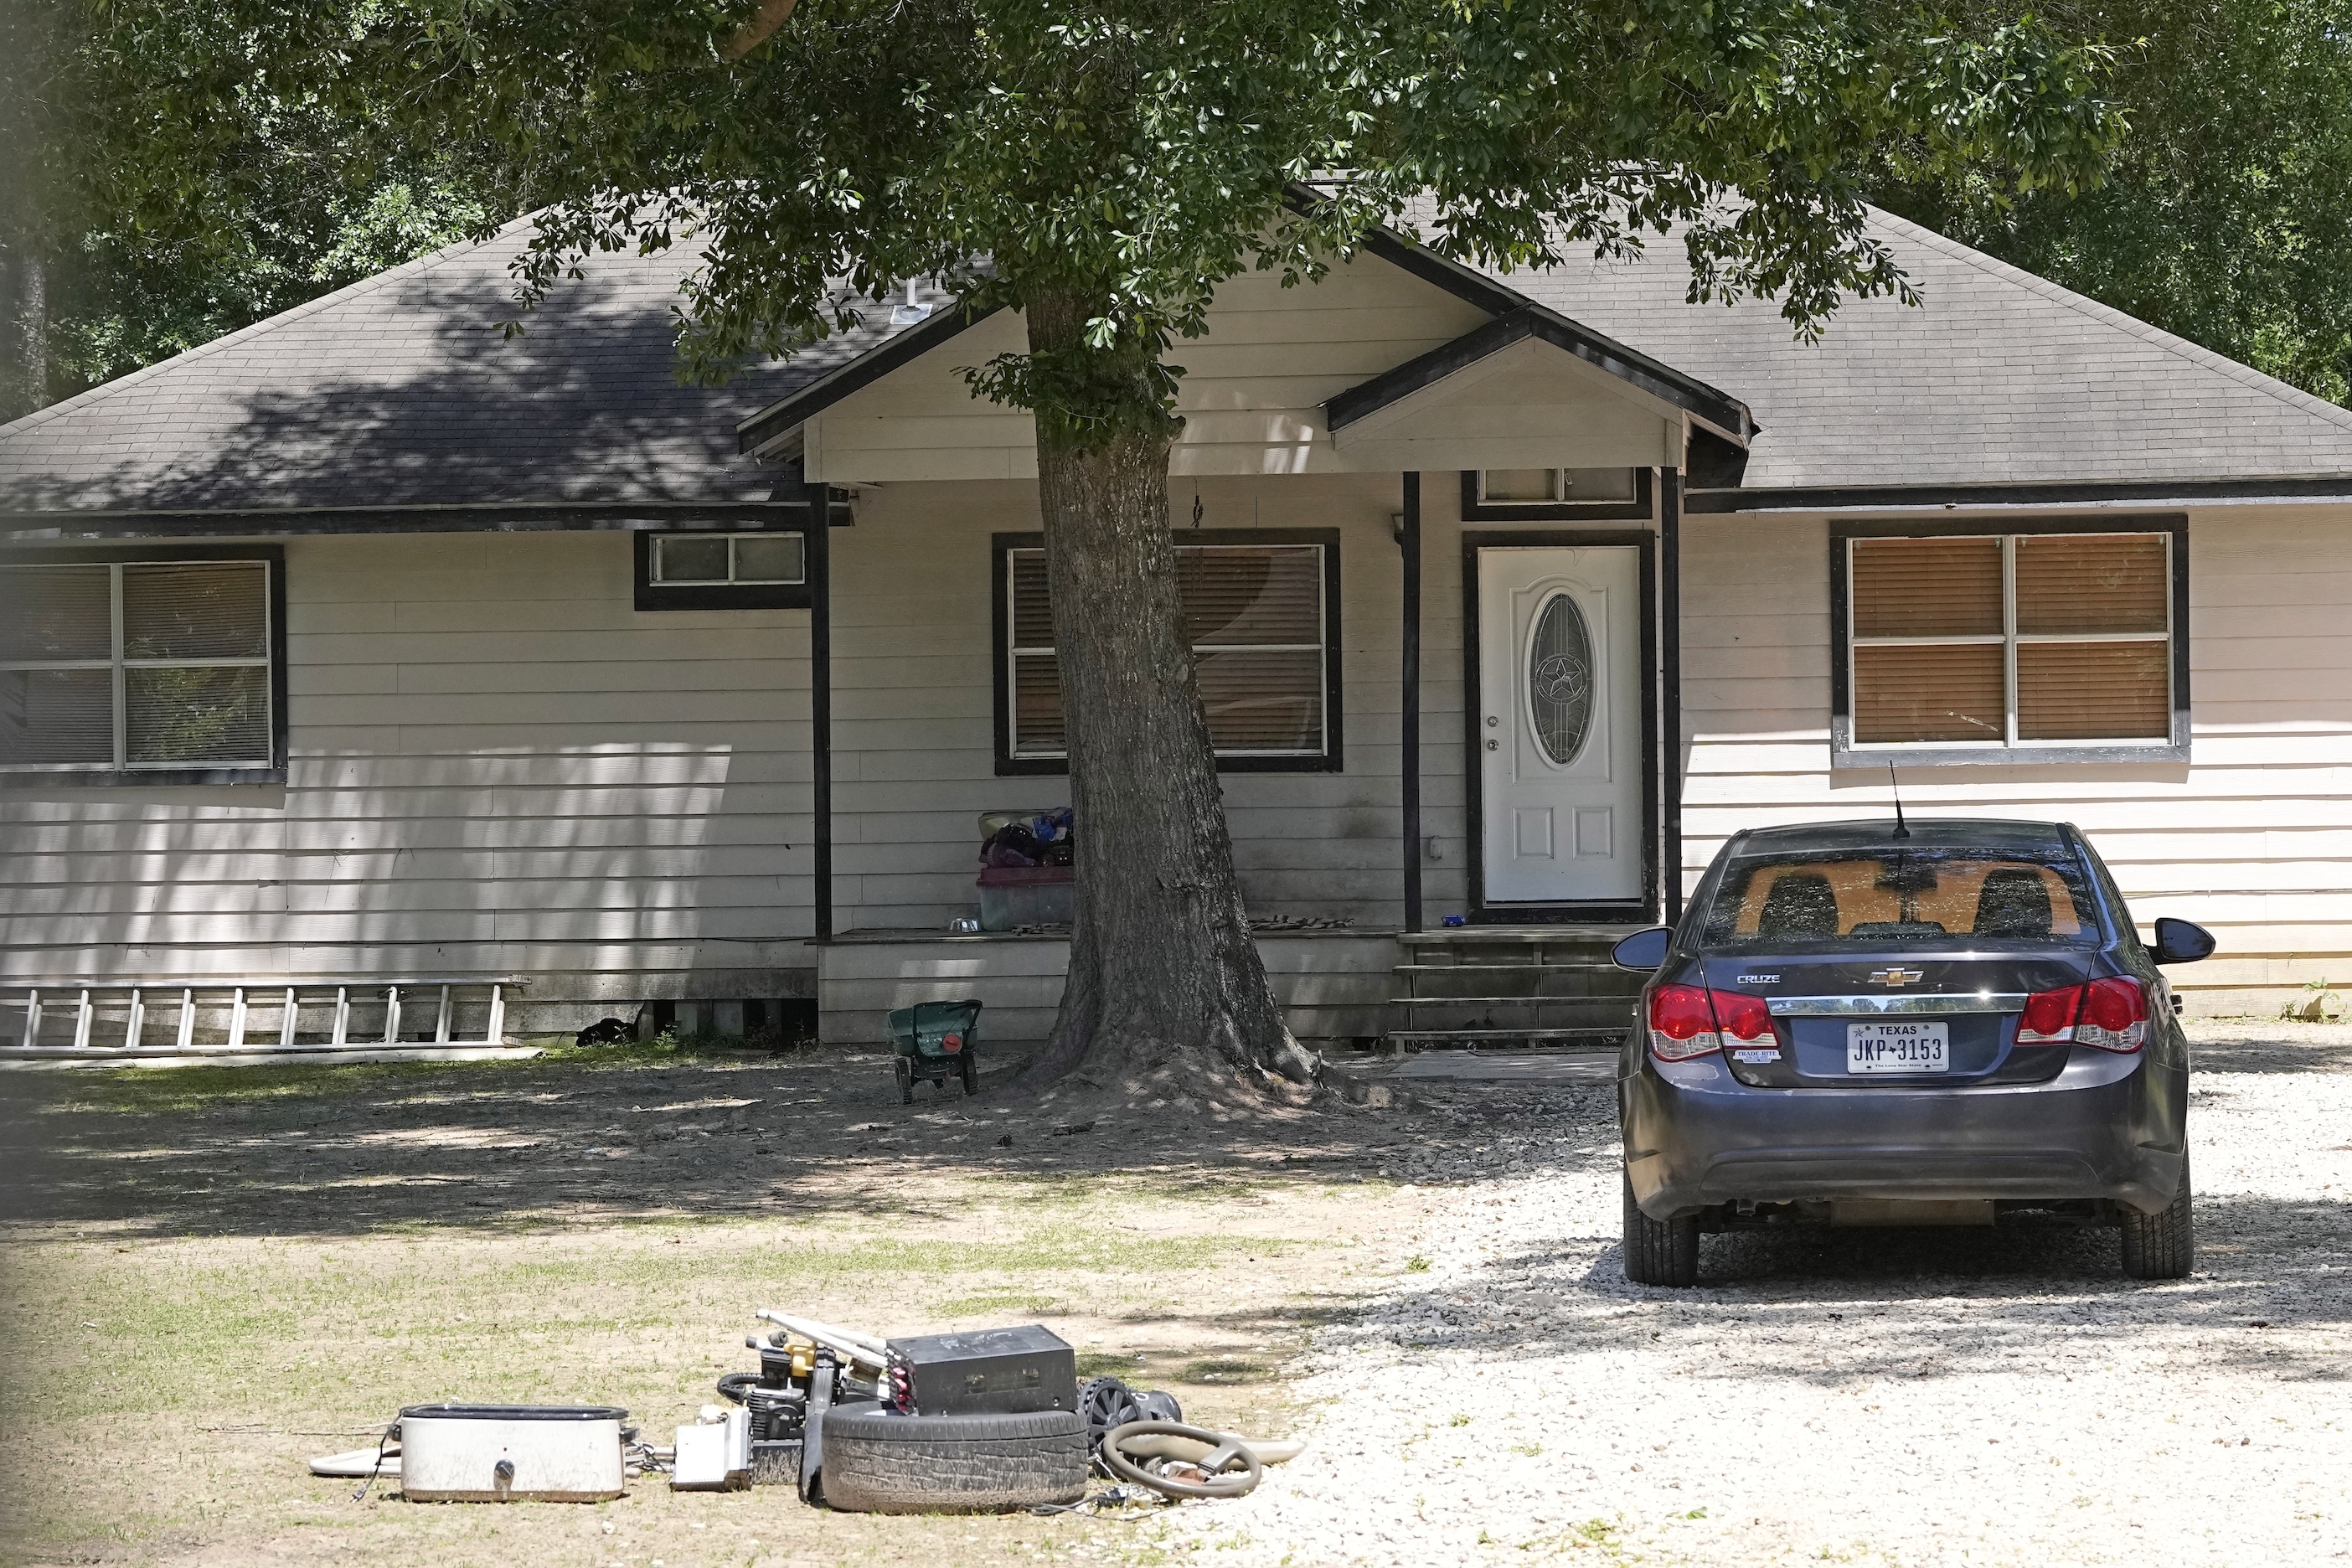 Manhunt ends with arrest of alleged murderer of five in Texas 